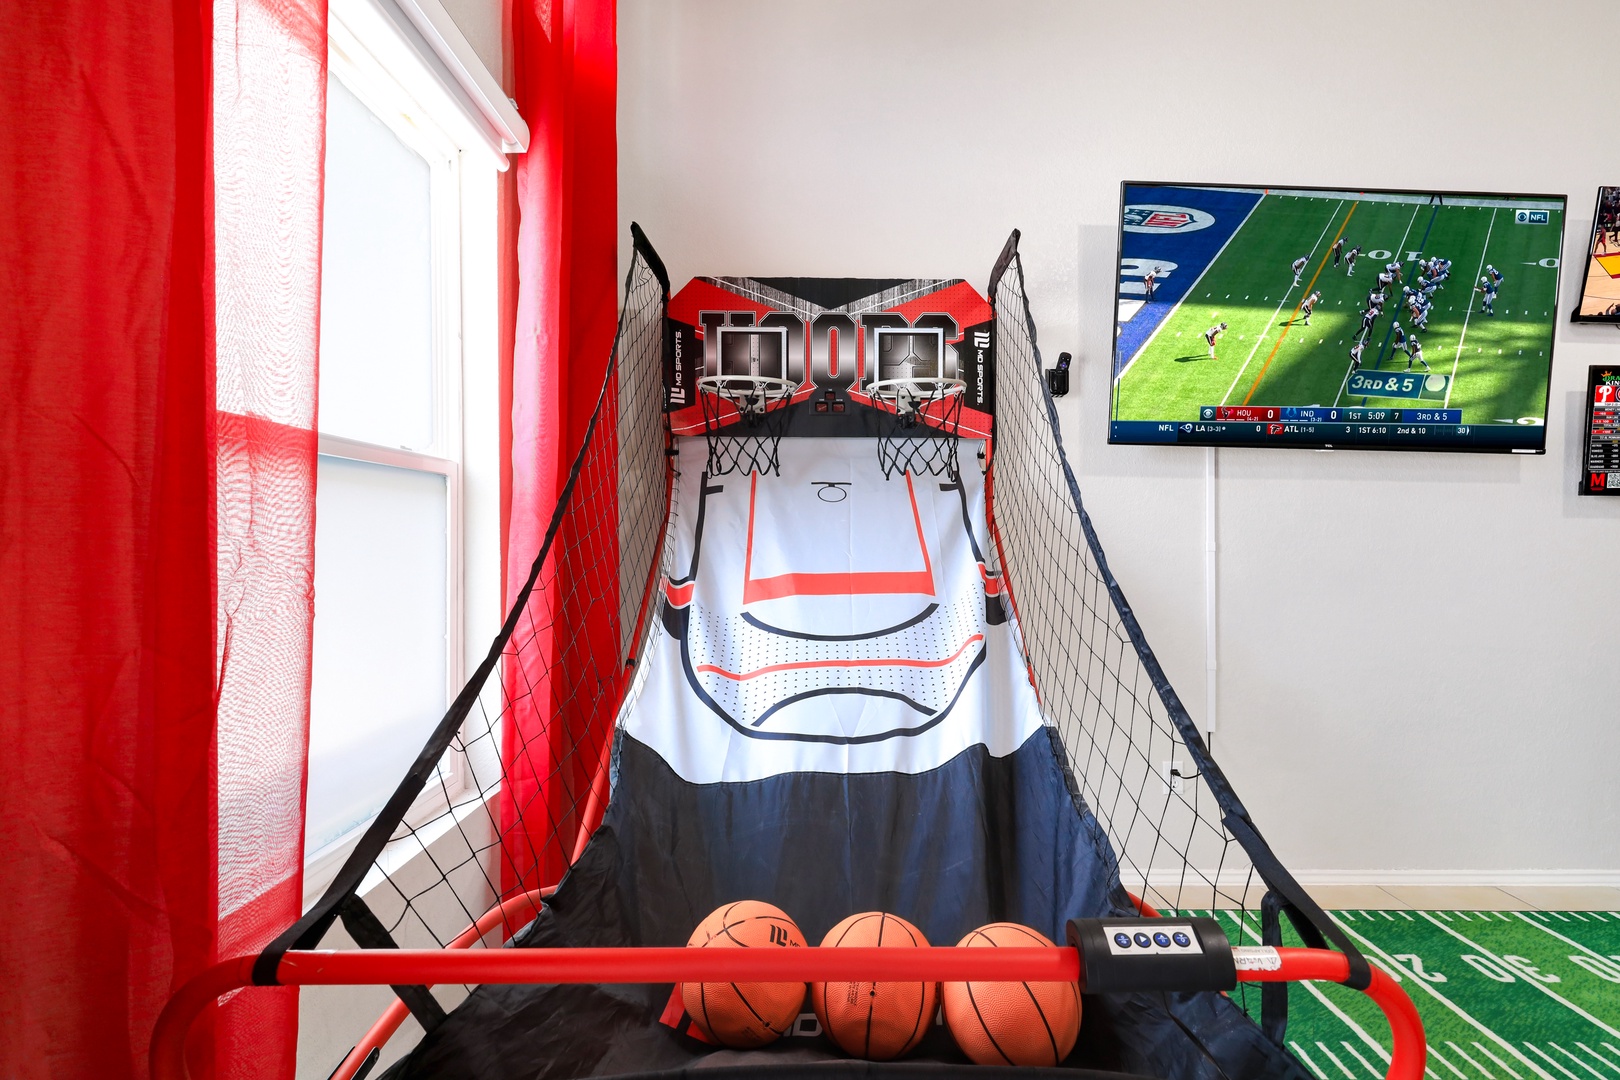 Game on - unleash your competitive side with a game of hoops!